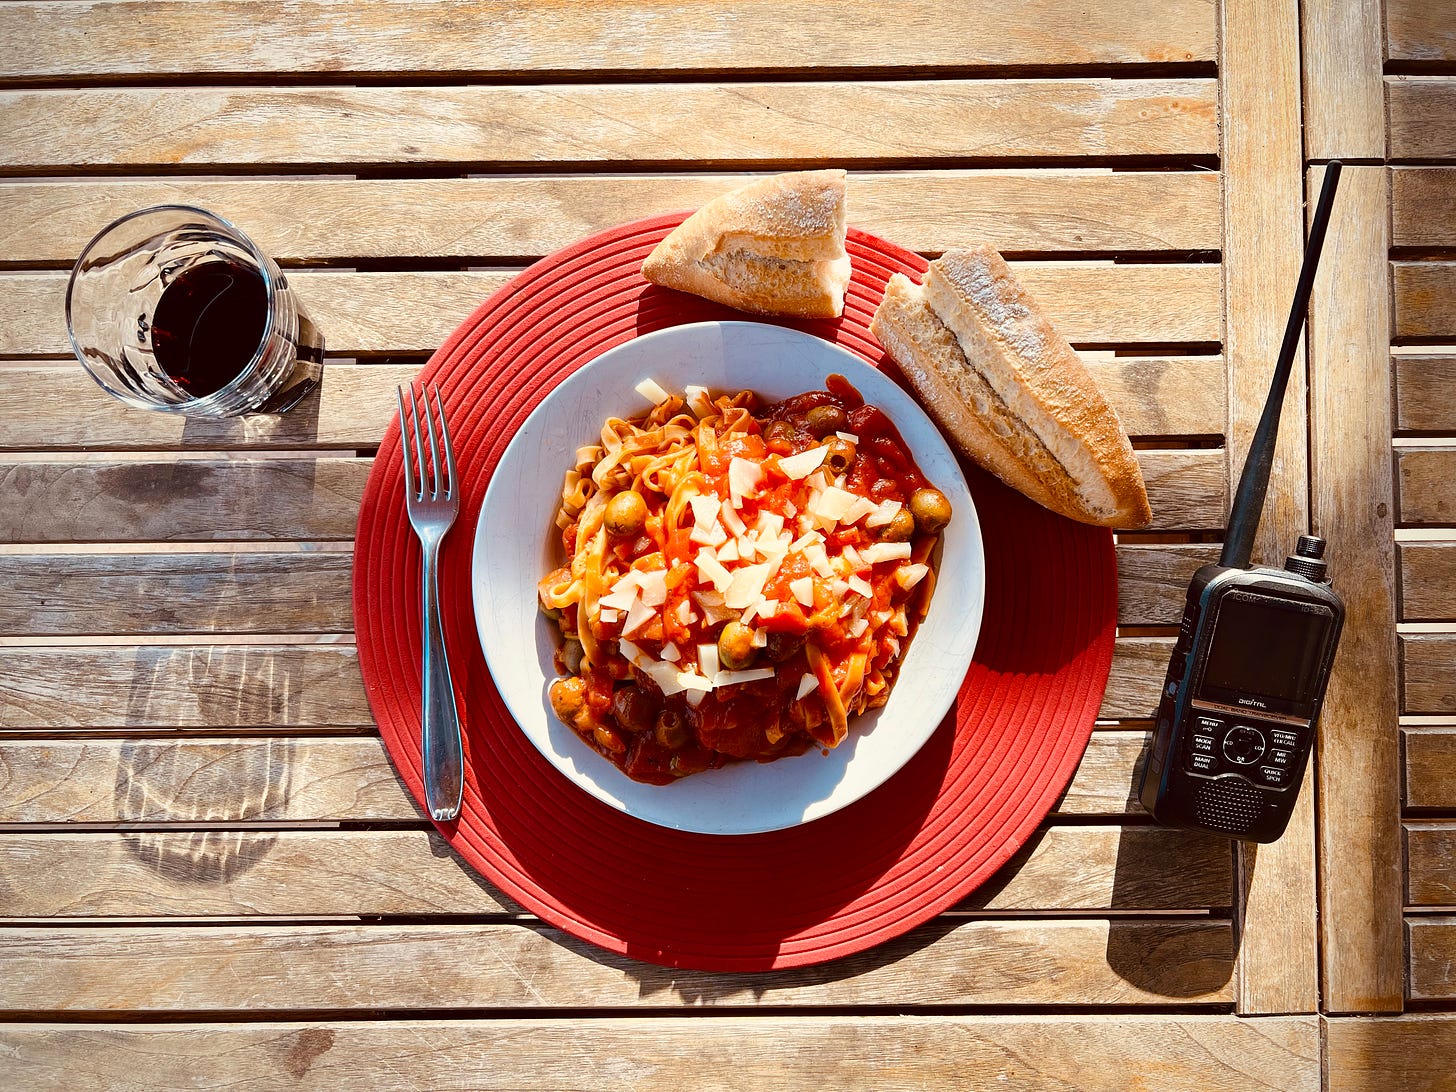 A glass of wine sits next to a plate of pasta, next to some bread and a radio. Long shadows are cast at the end of a warm Spanish day in February 